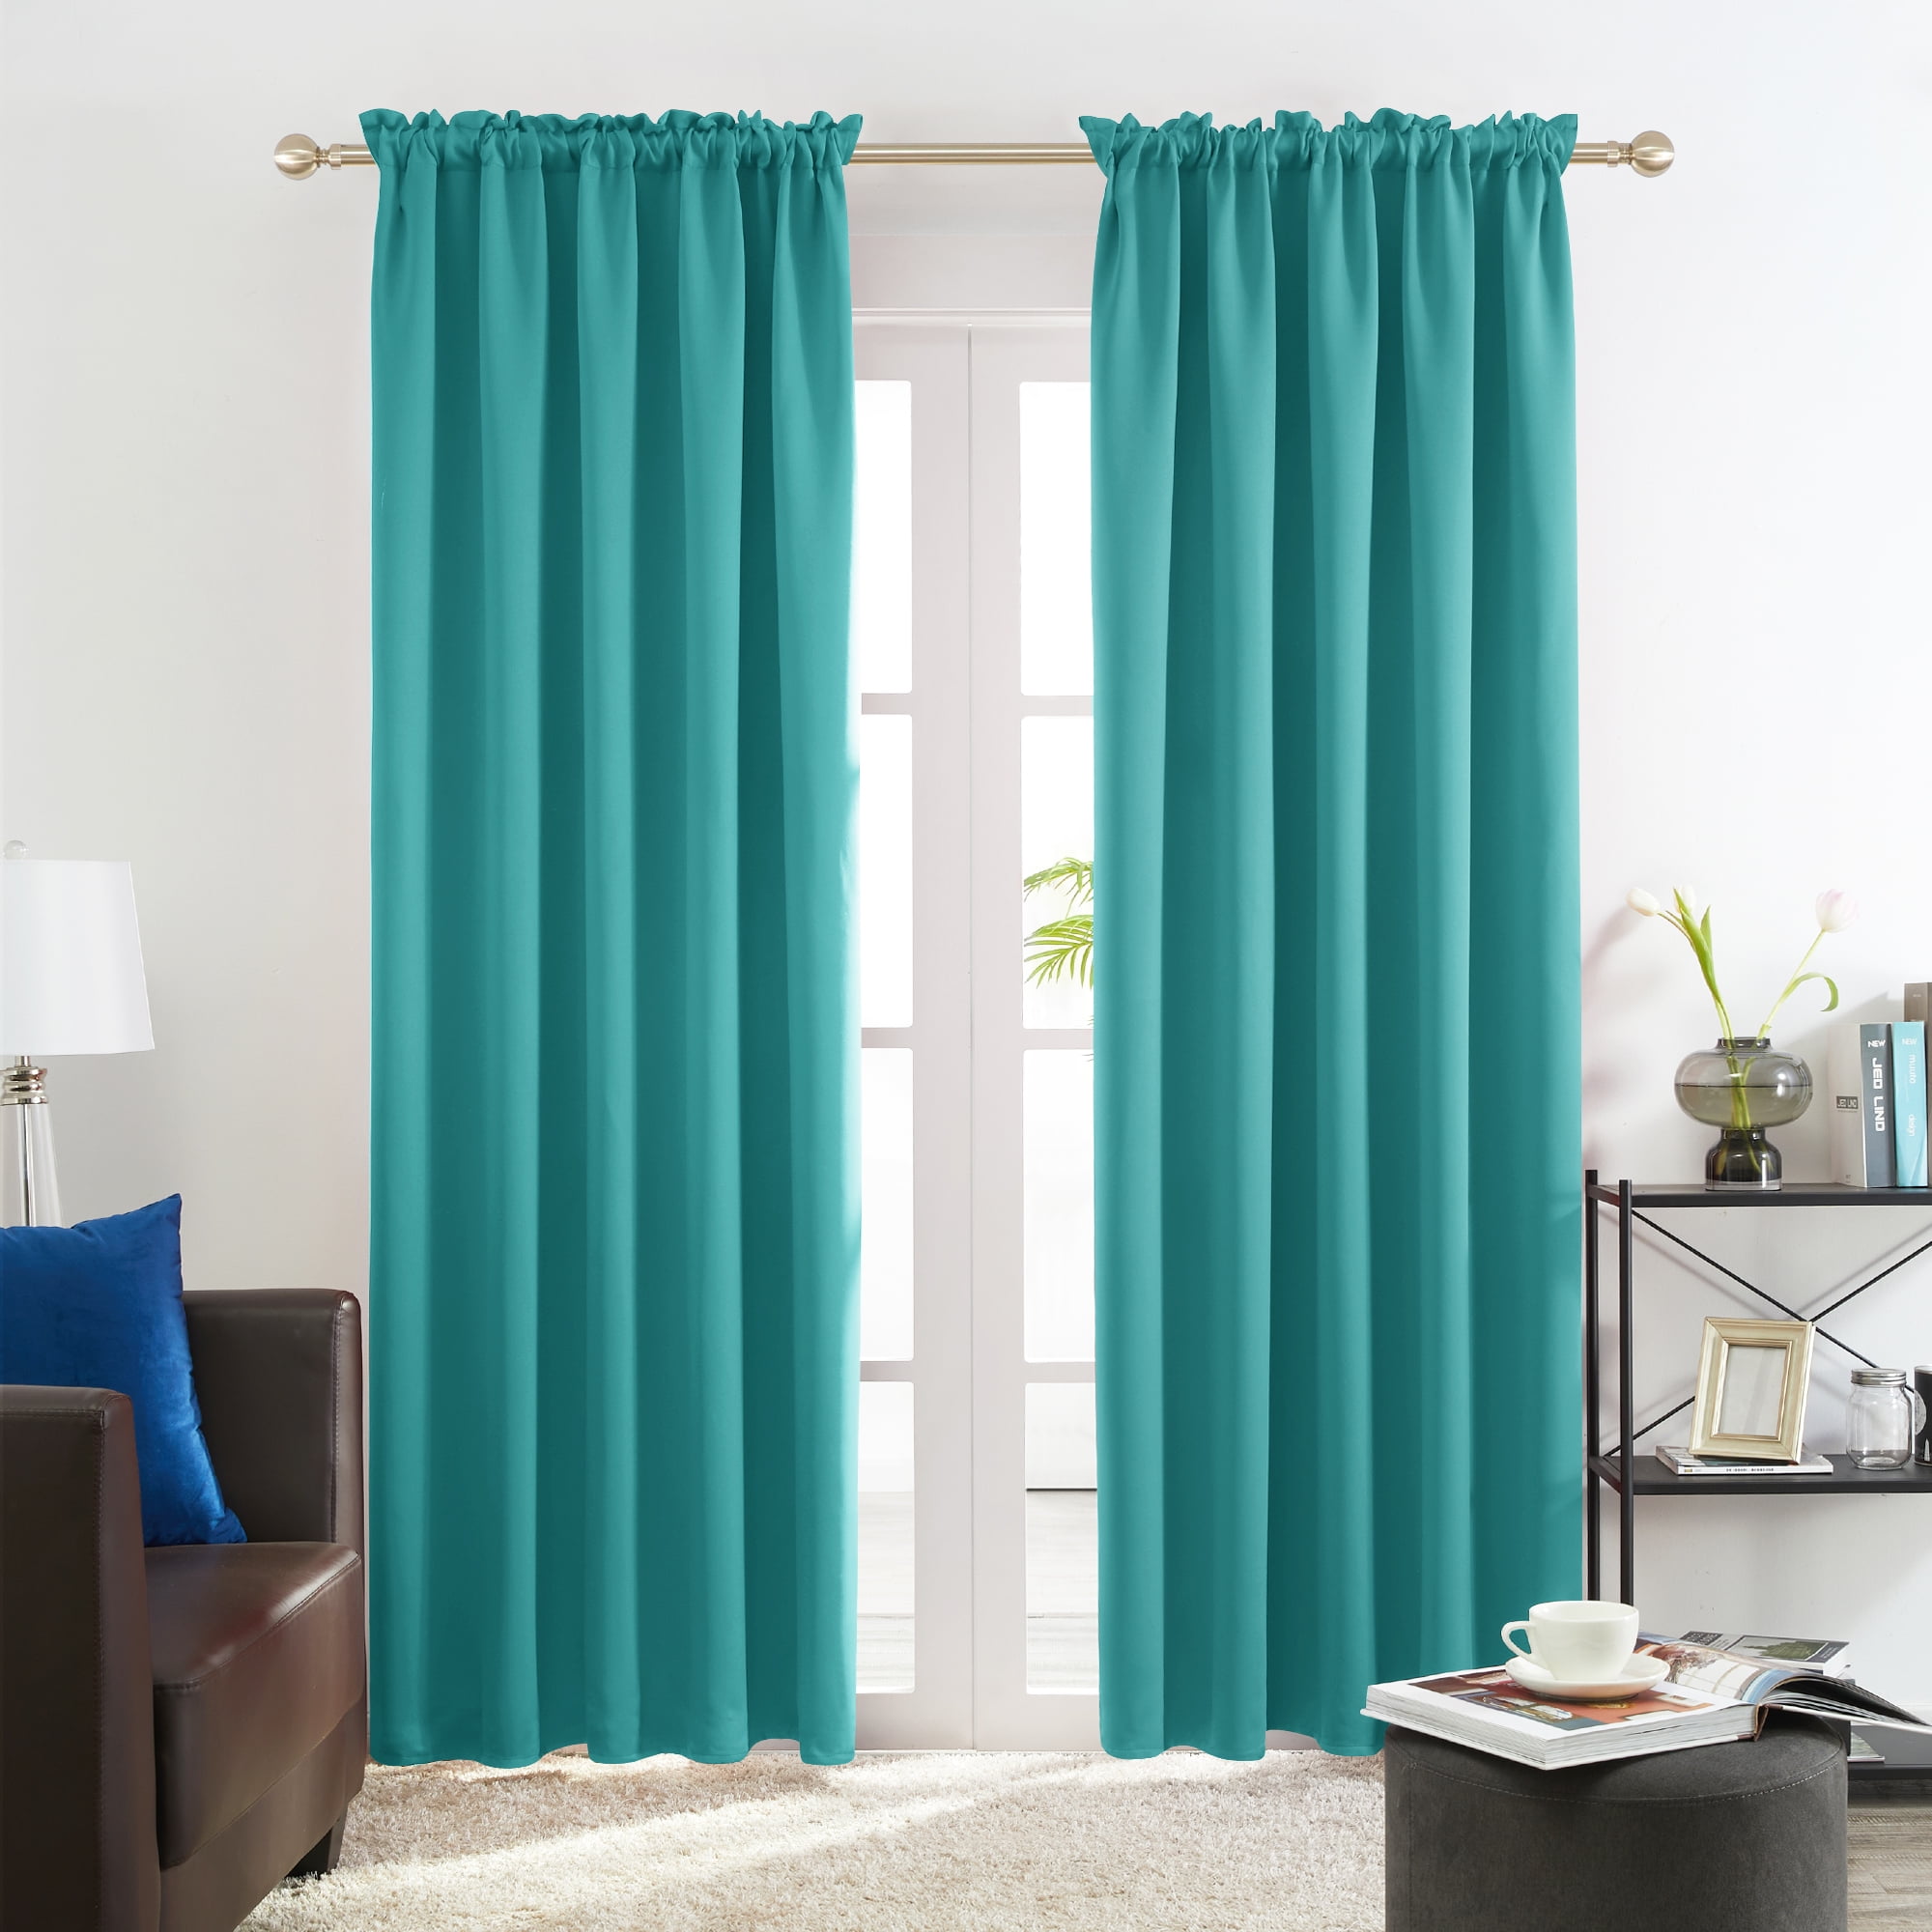 Deconovo Teal 2 Panels Sun Blocking Curtains Blackout Window Cover for Boys Room, 42W x 95L inch